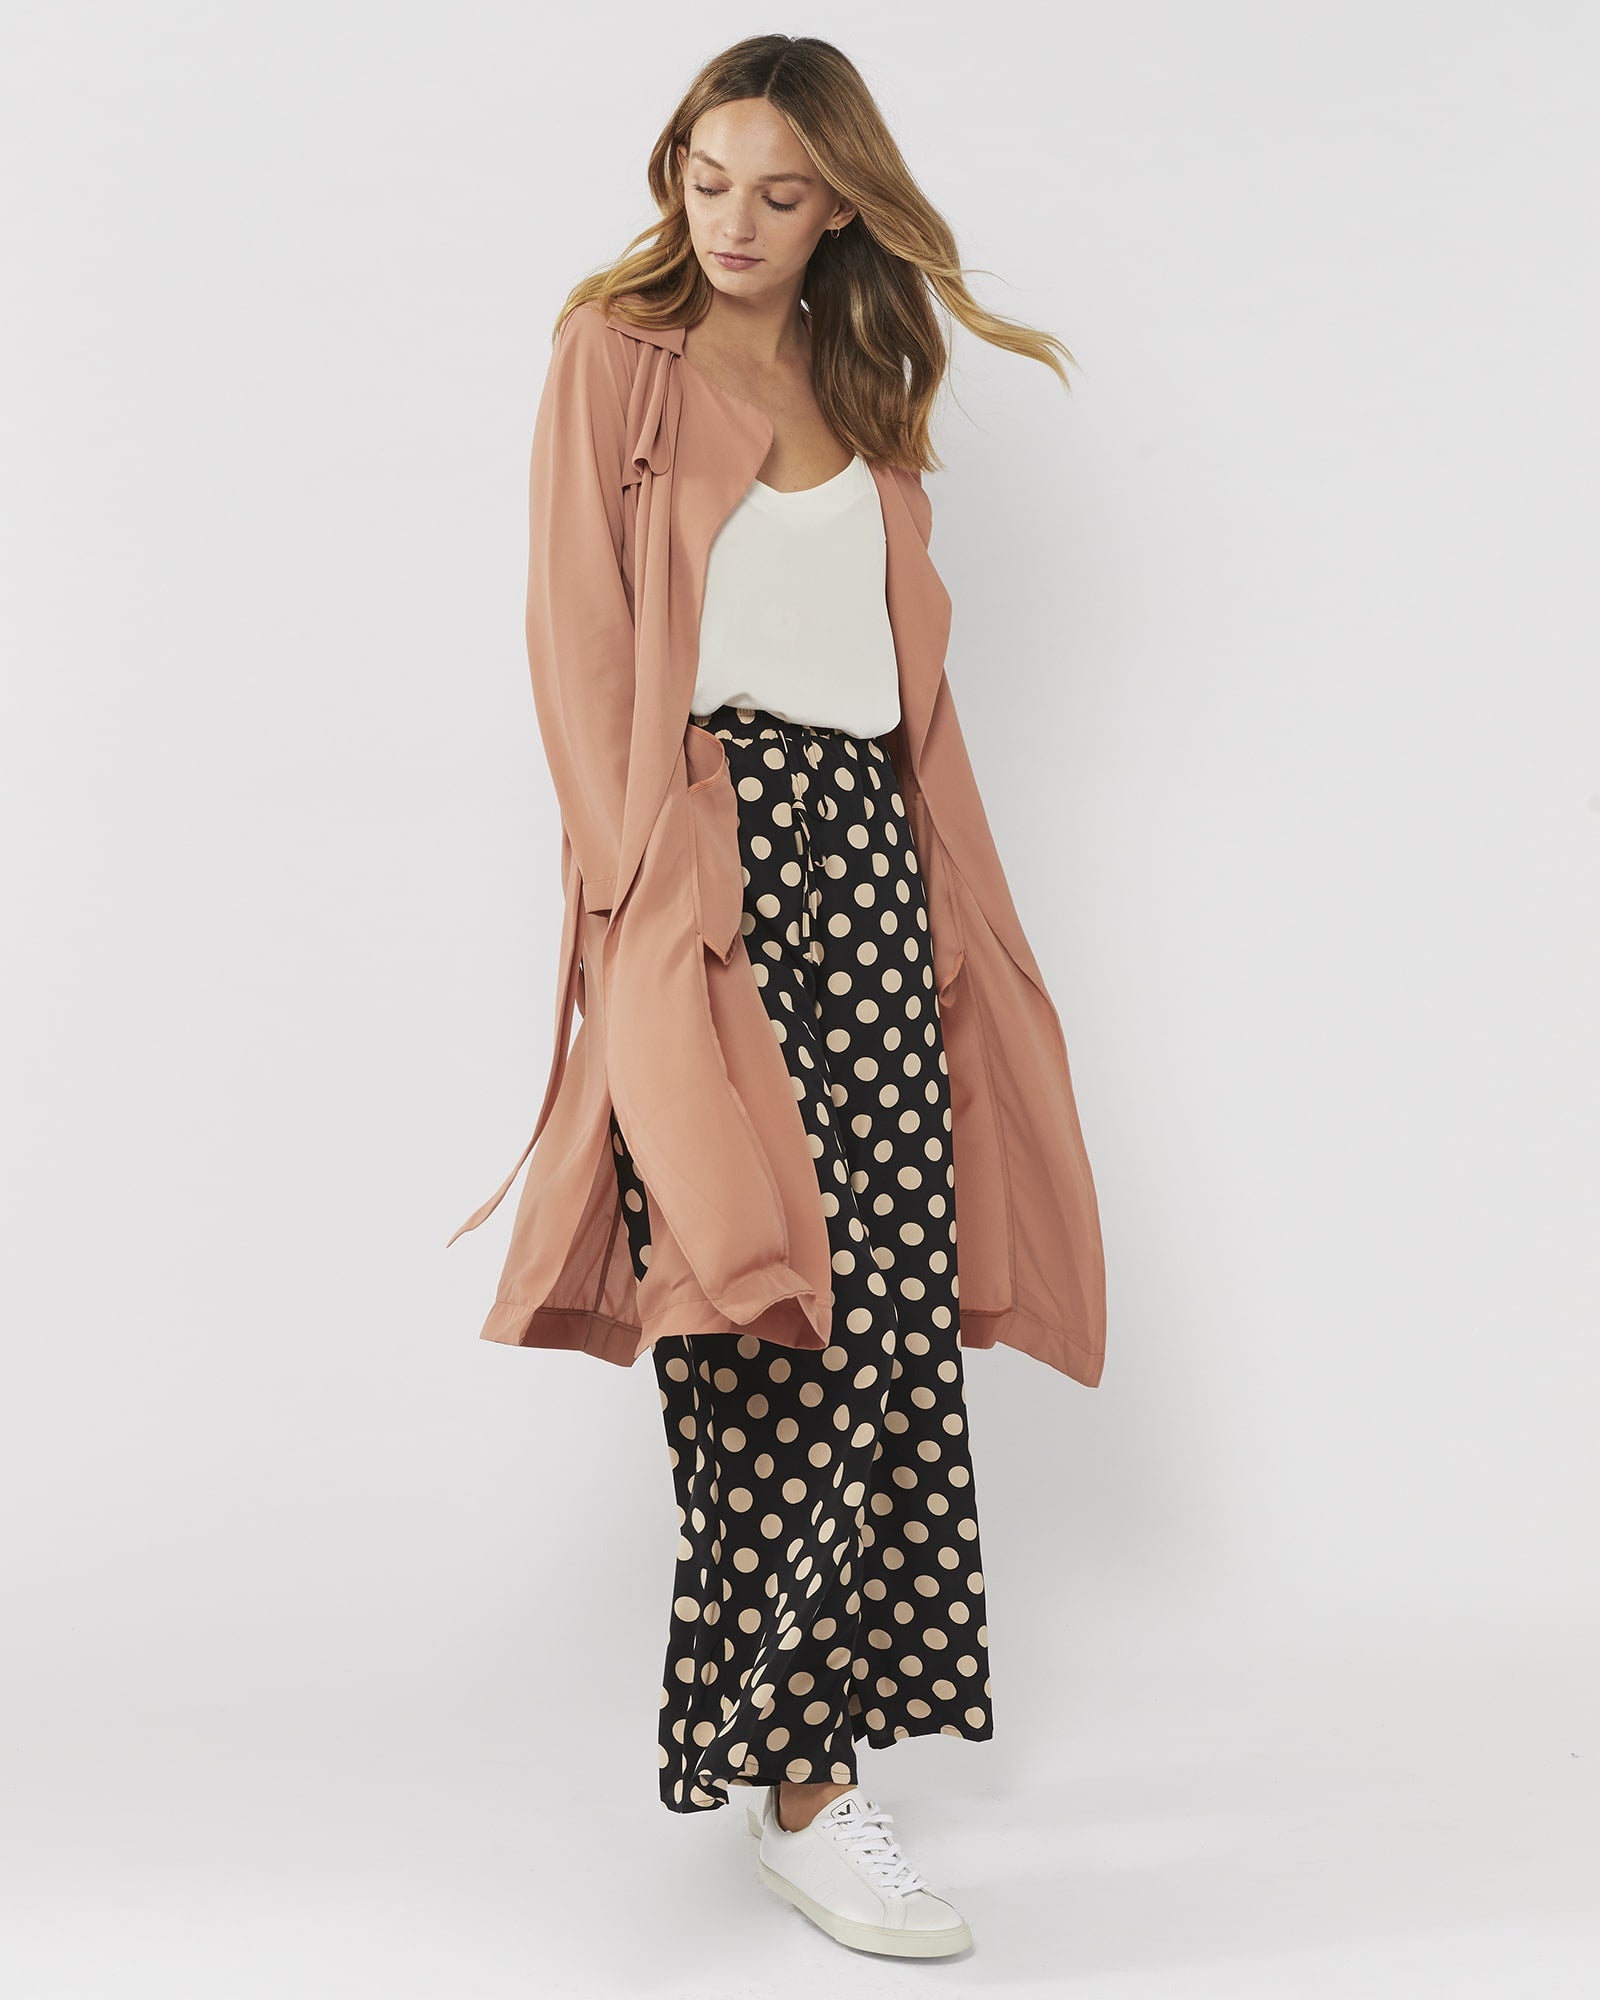 BY YOUR SIDE SHEER TRENCH - TERRACOTTA